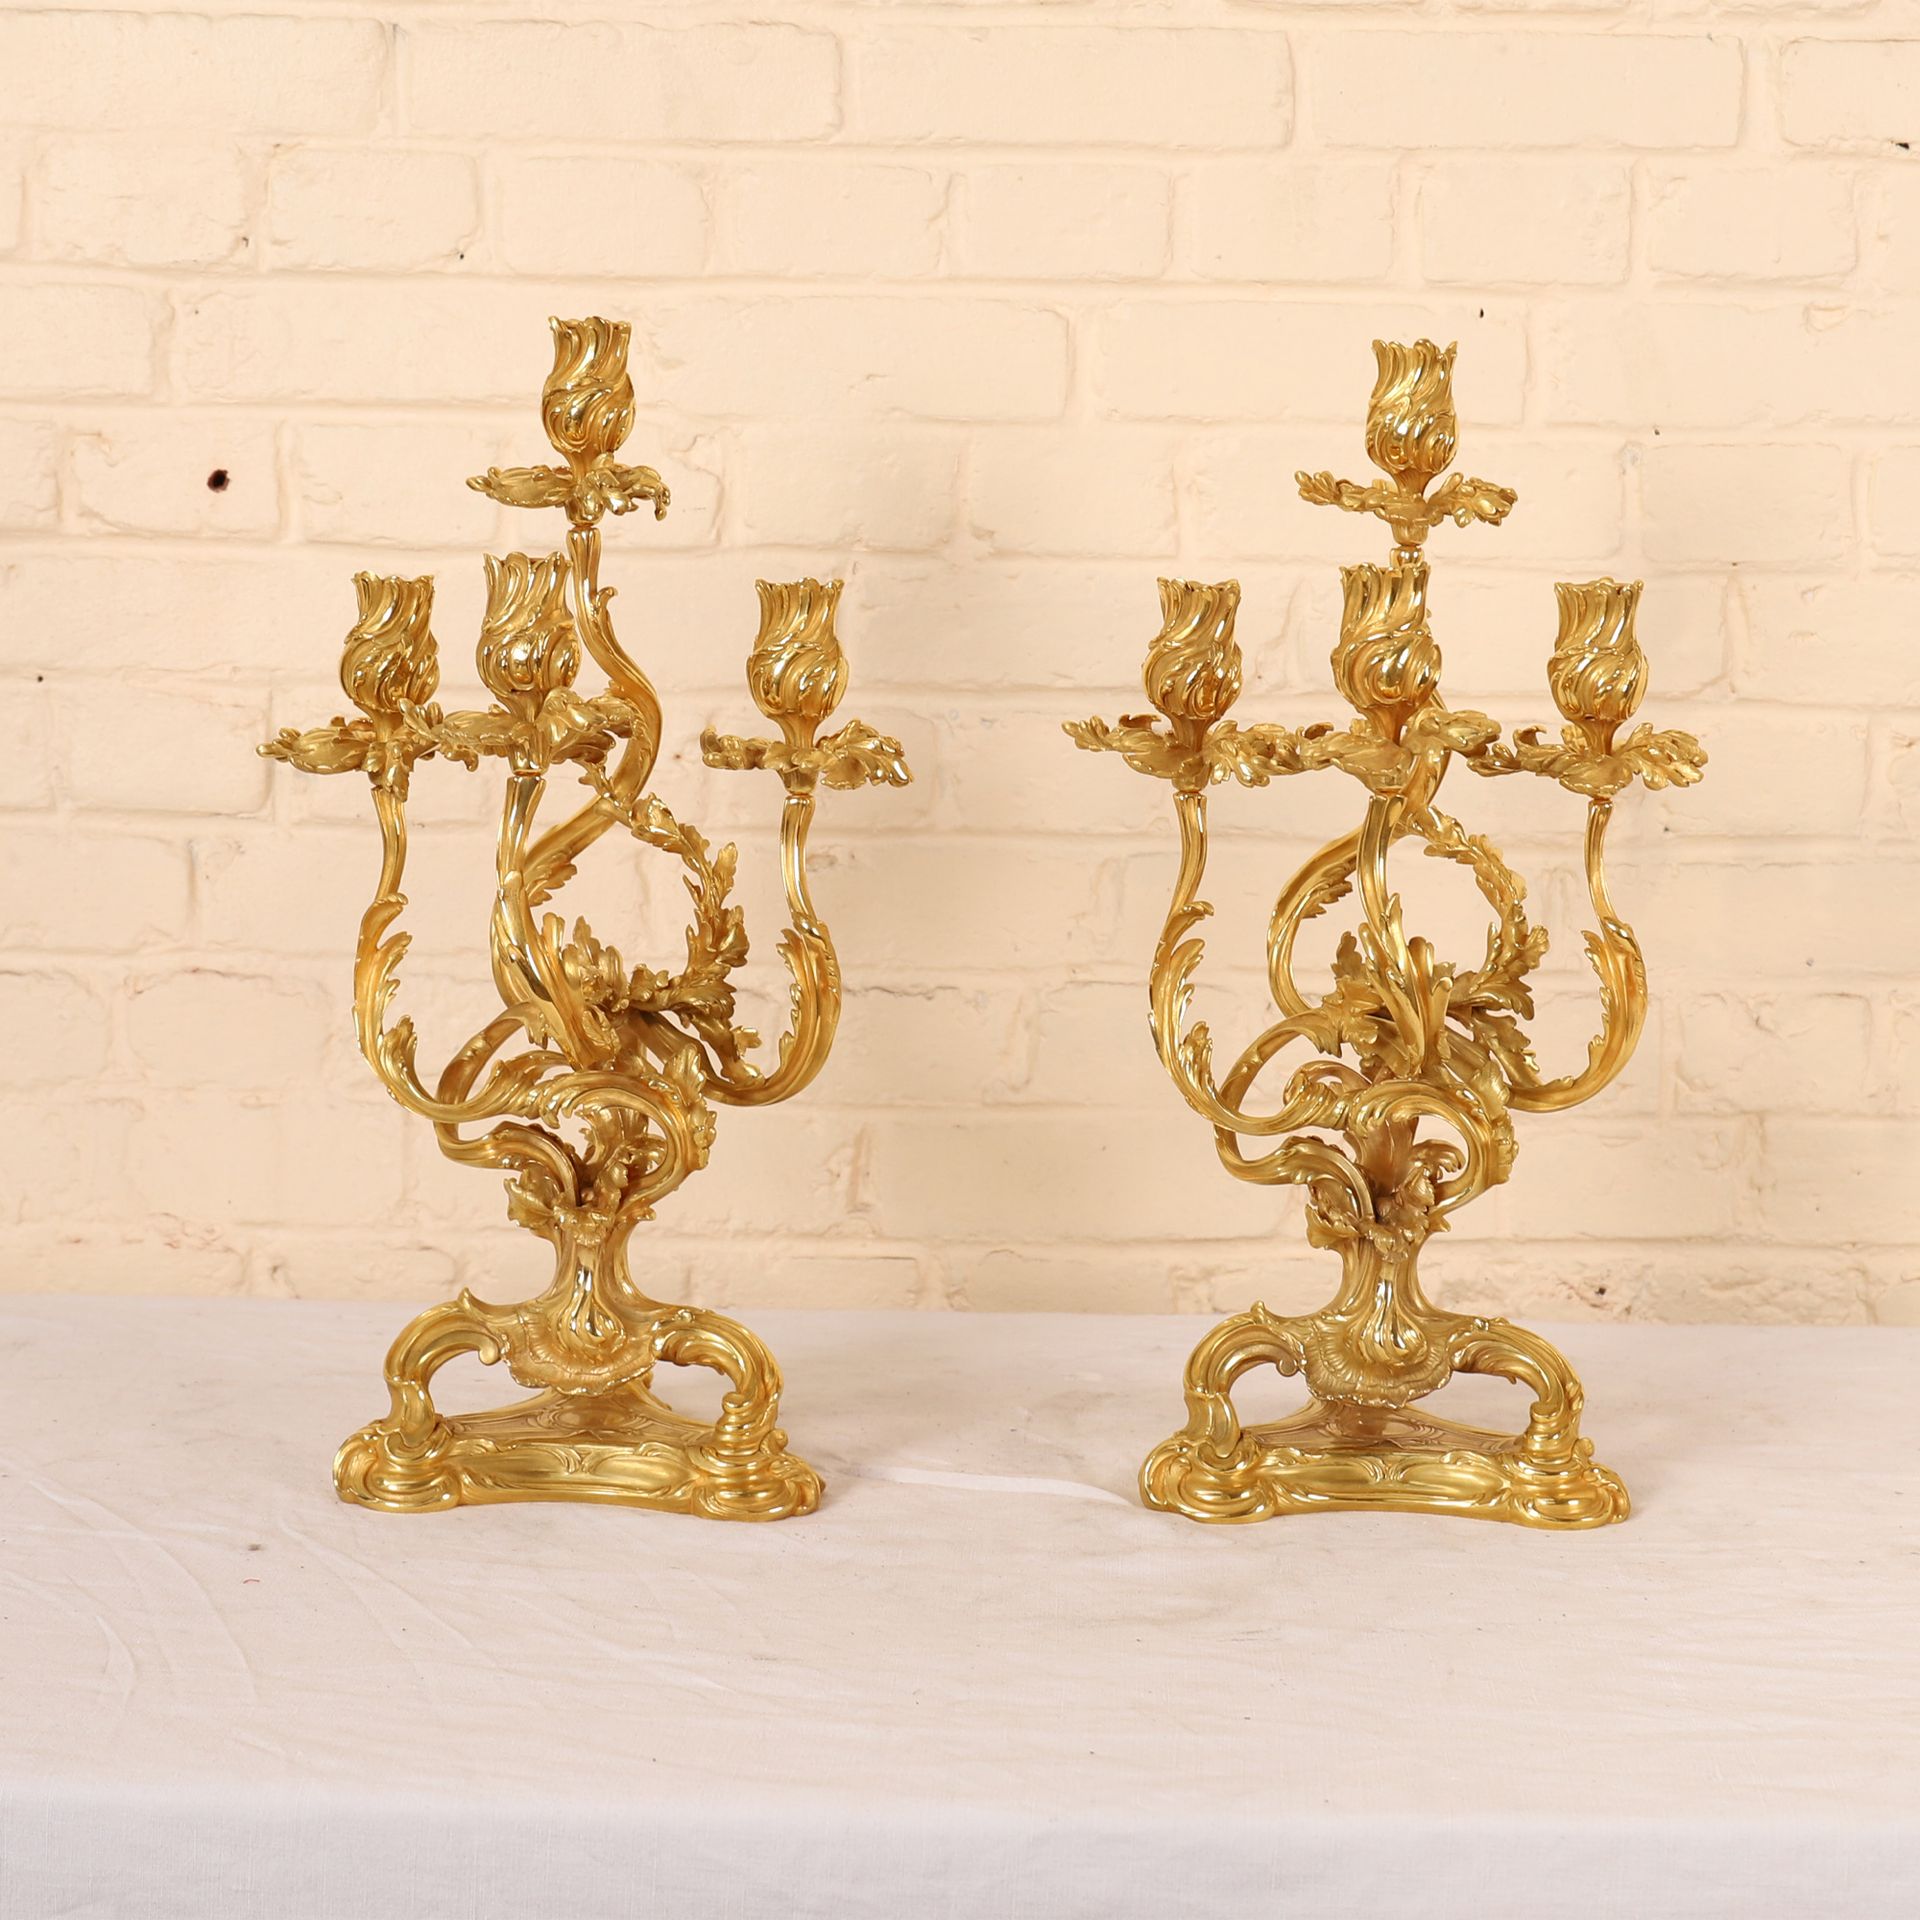 Null PAIR OF GOLDEN BRONZE CANDELABRES LOUIS XV style, model of Caffieri

With f&hellip;